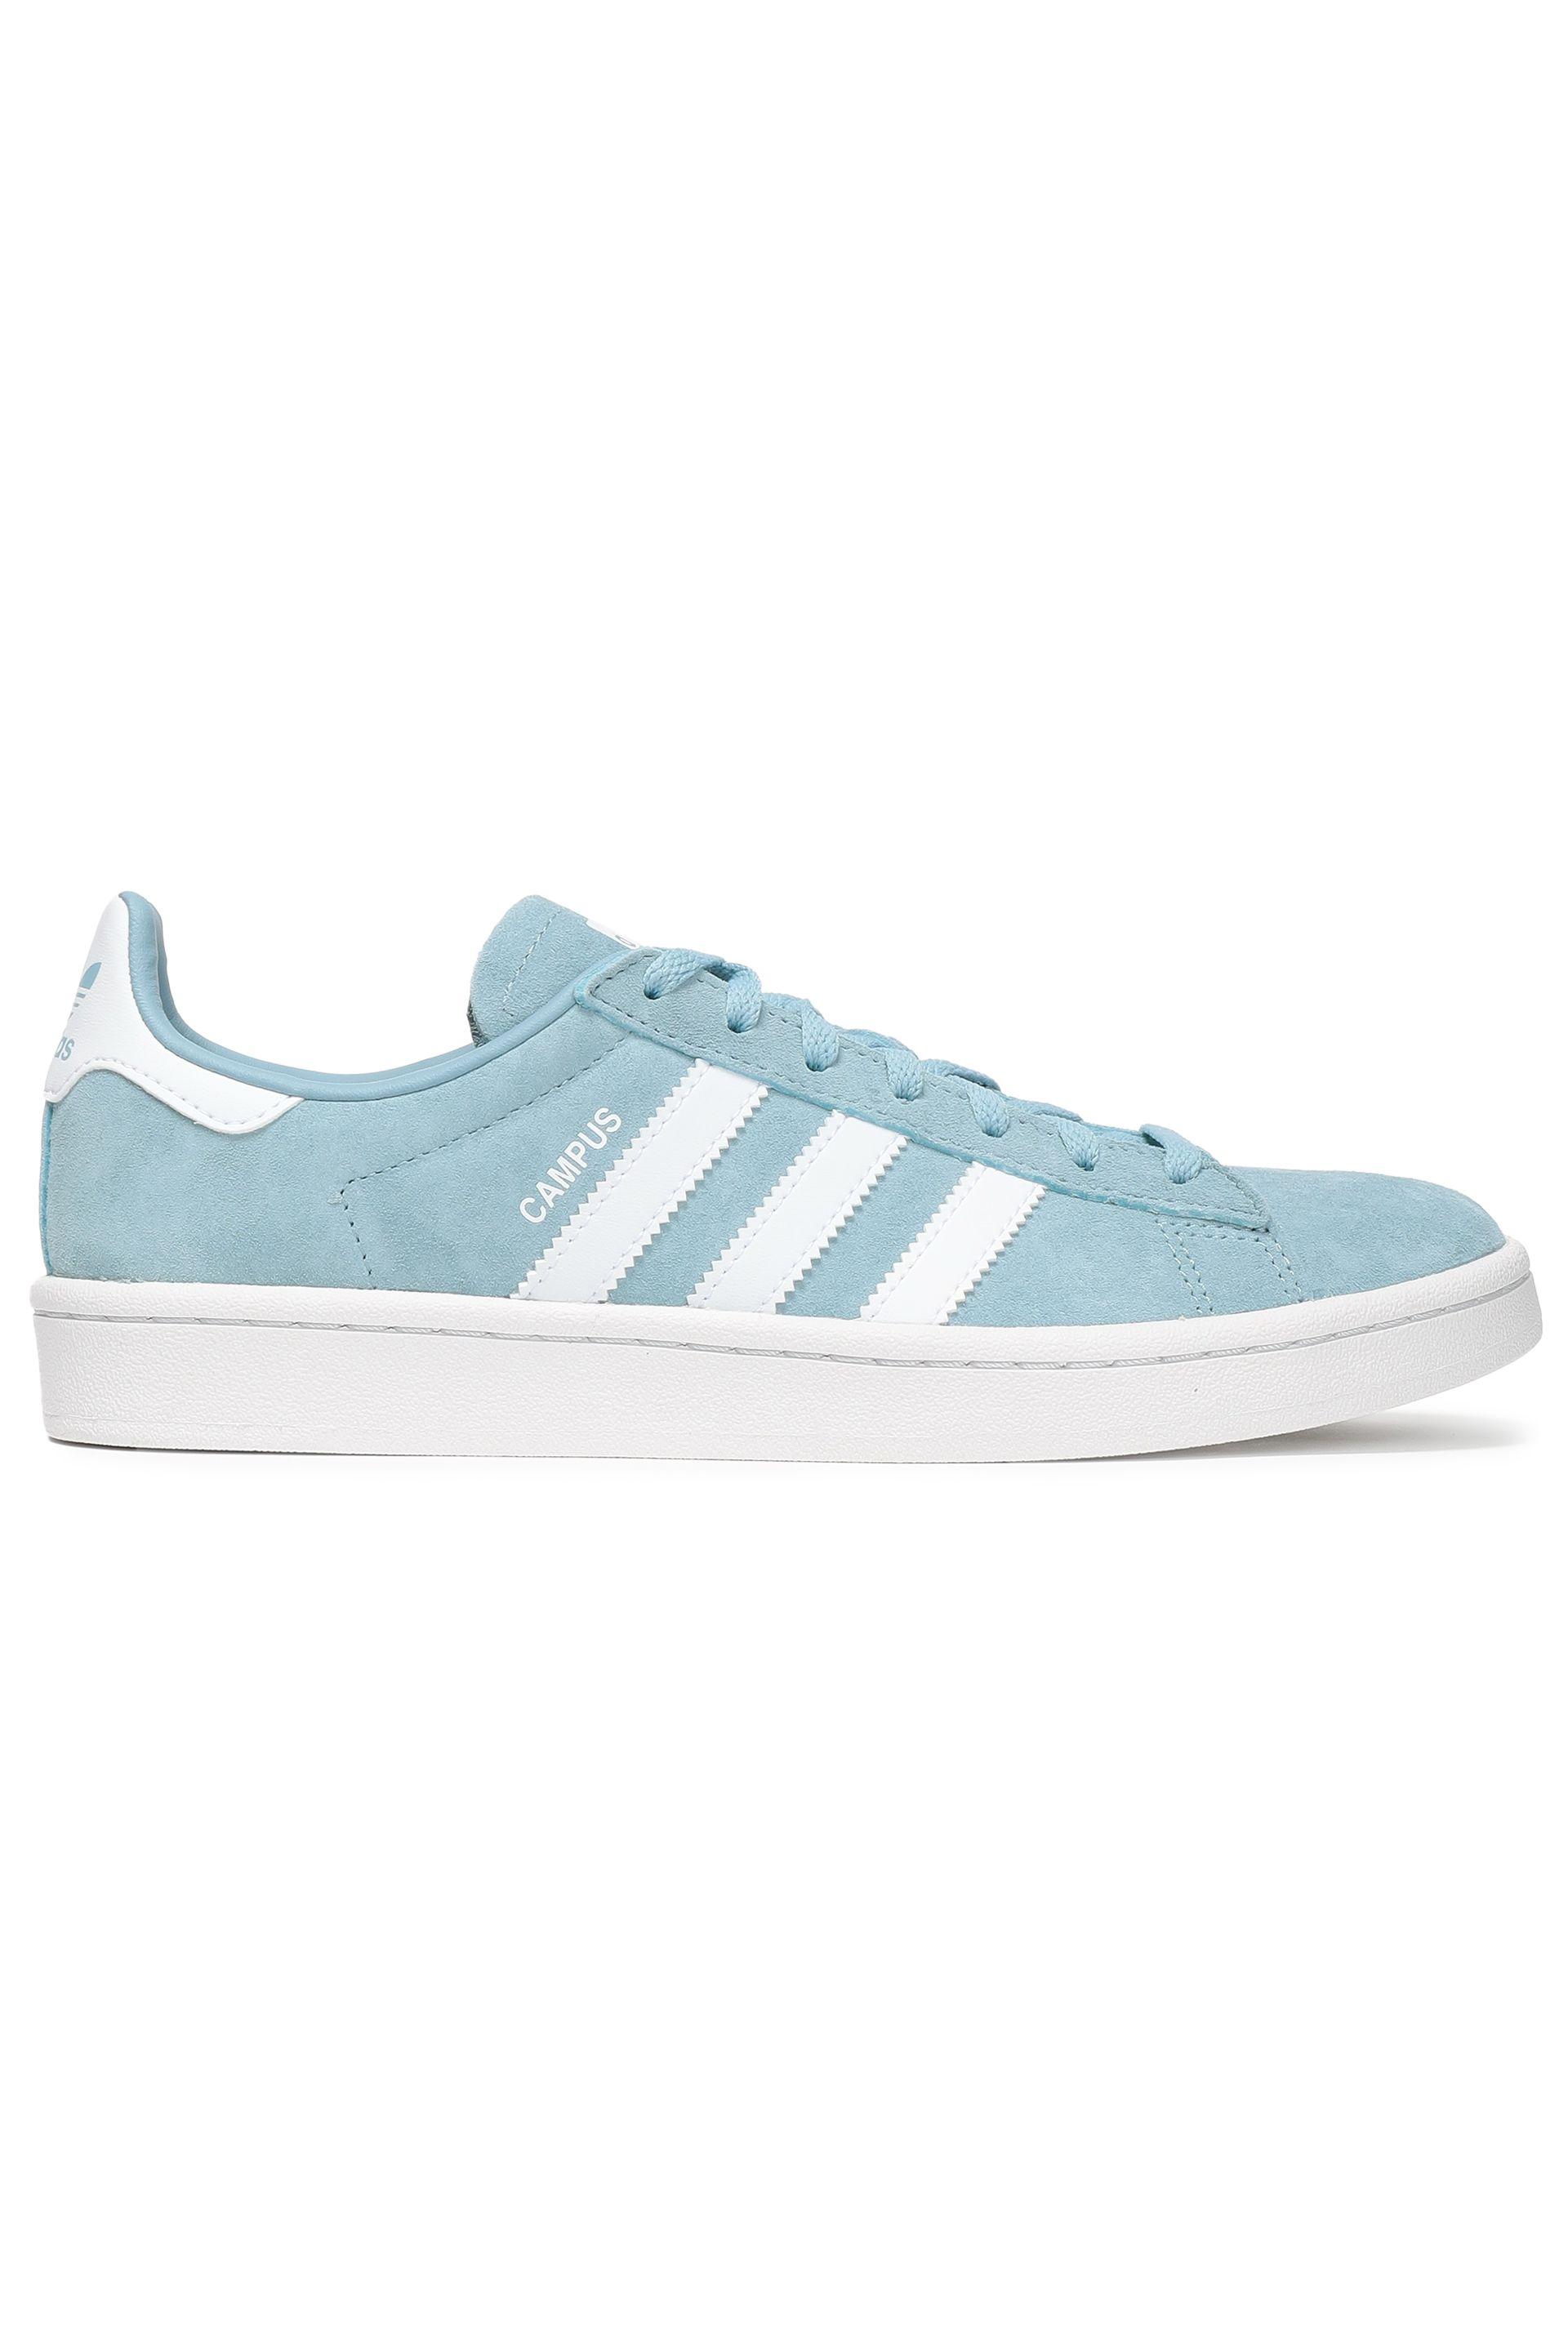 adidas Originals Campus Leather-trimmed Suede Sneakers Sky Blue - Lyst